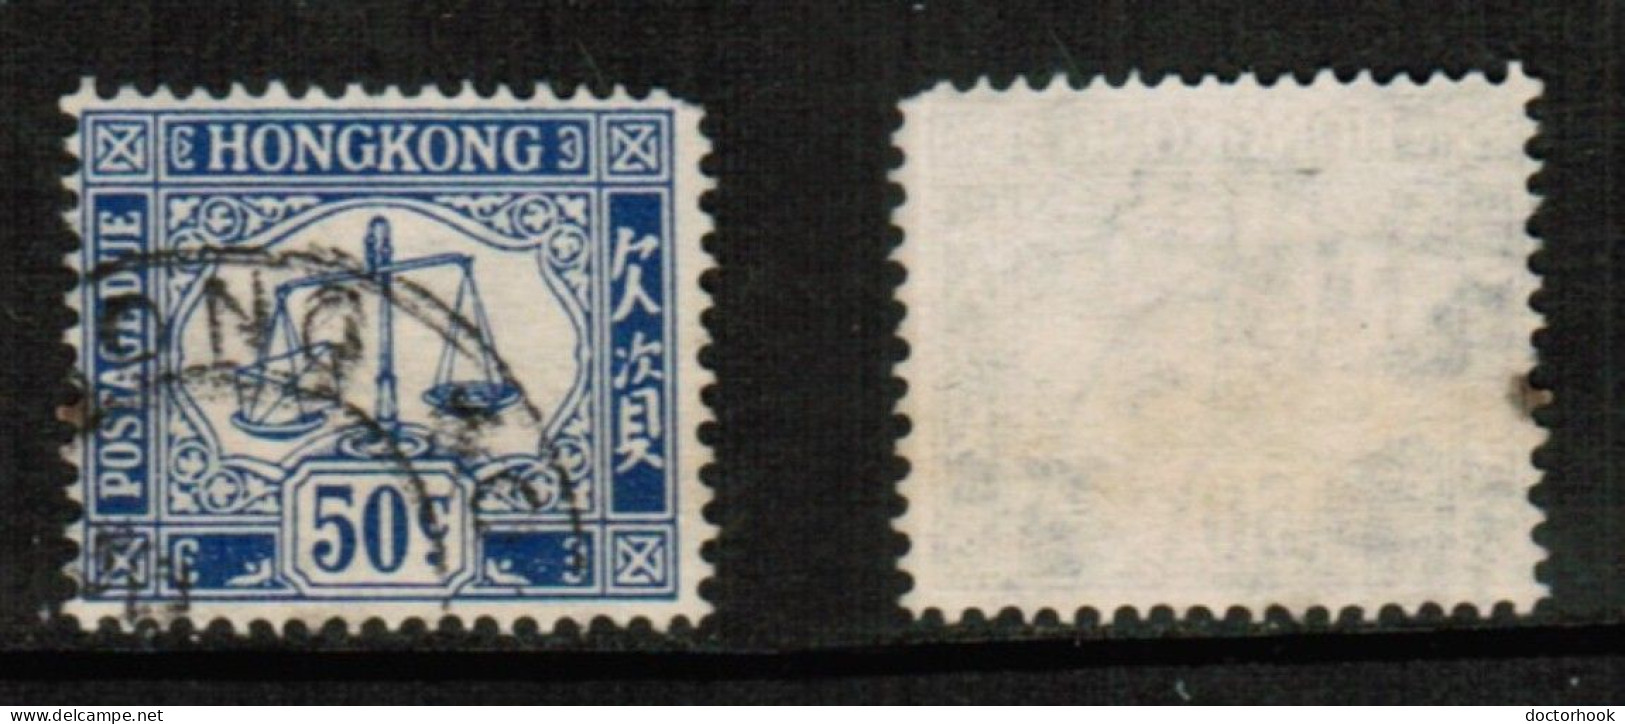 HONG KONG   Scott # J 12 USED (CONDITION AS PER SCAN) (Stamp Scan # 924-6) - Timbres-taxe